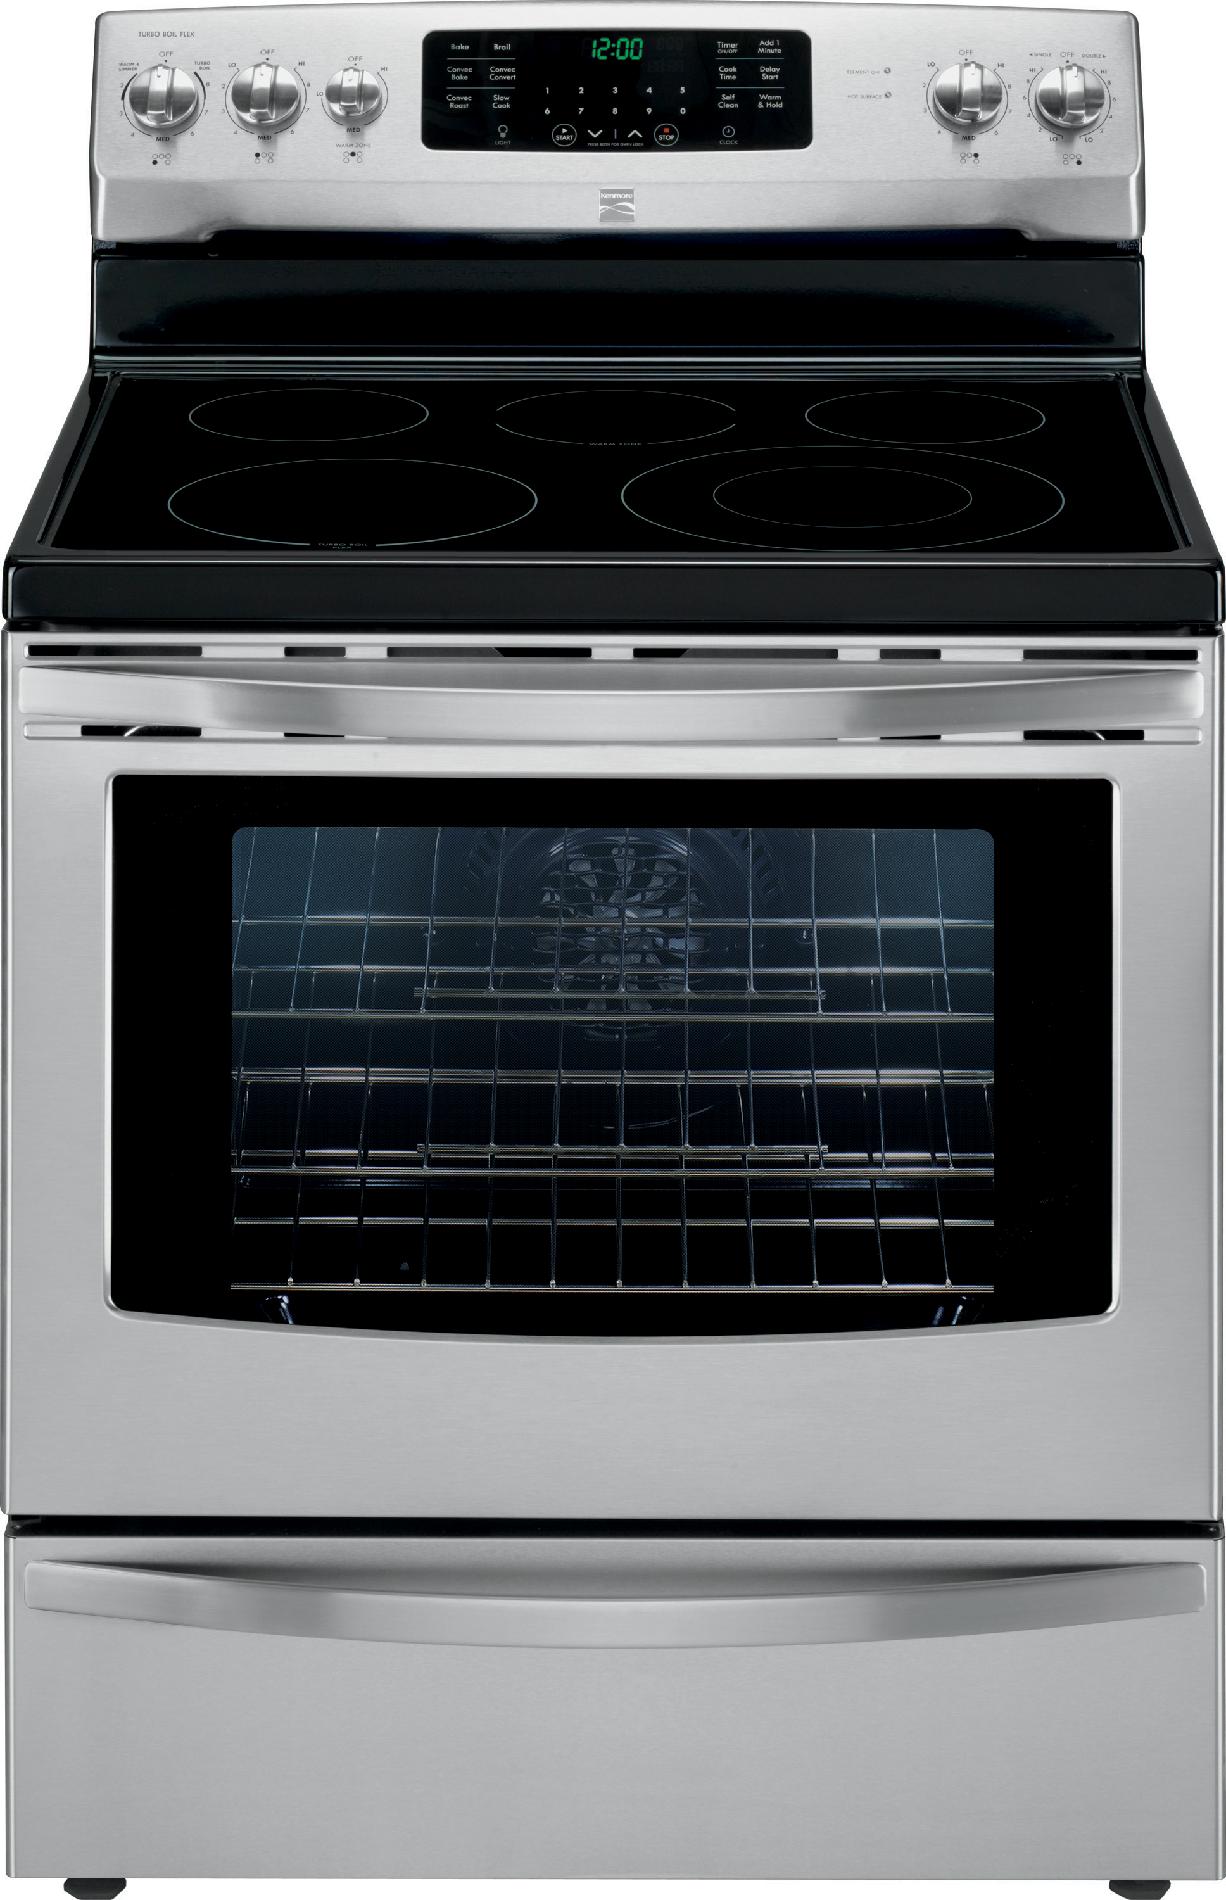 Kenmore 5.7 cu. ft. Electric Range w/ Convection - Stainless Steel